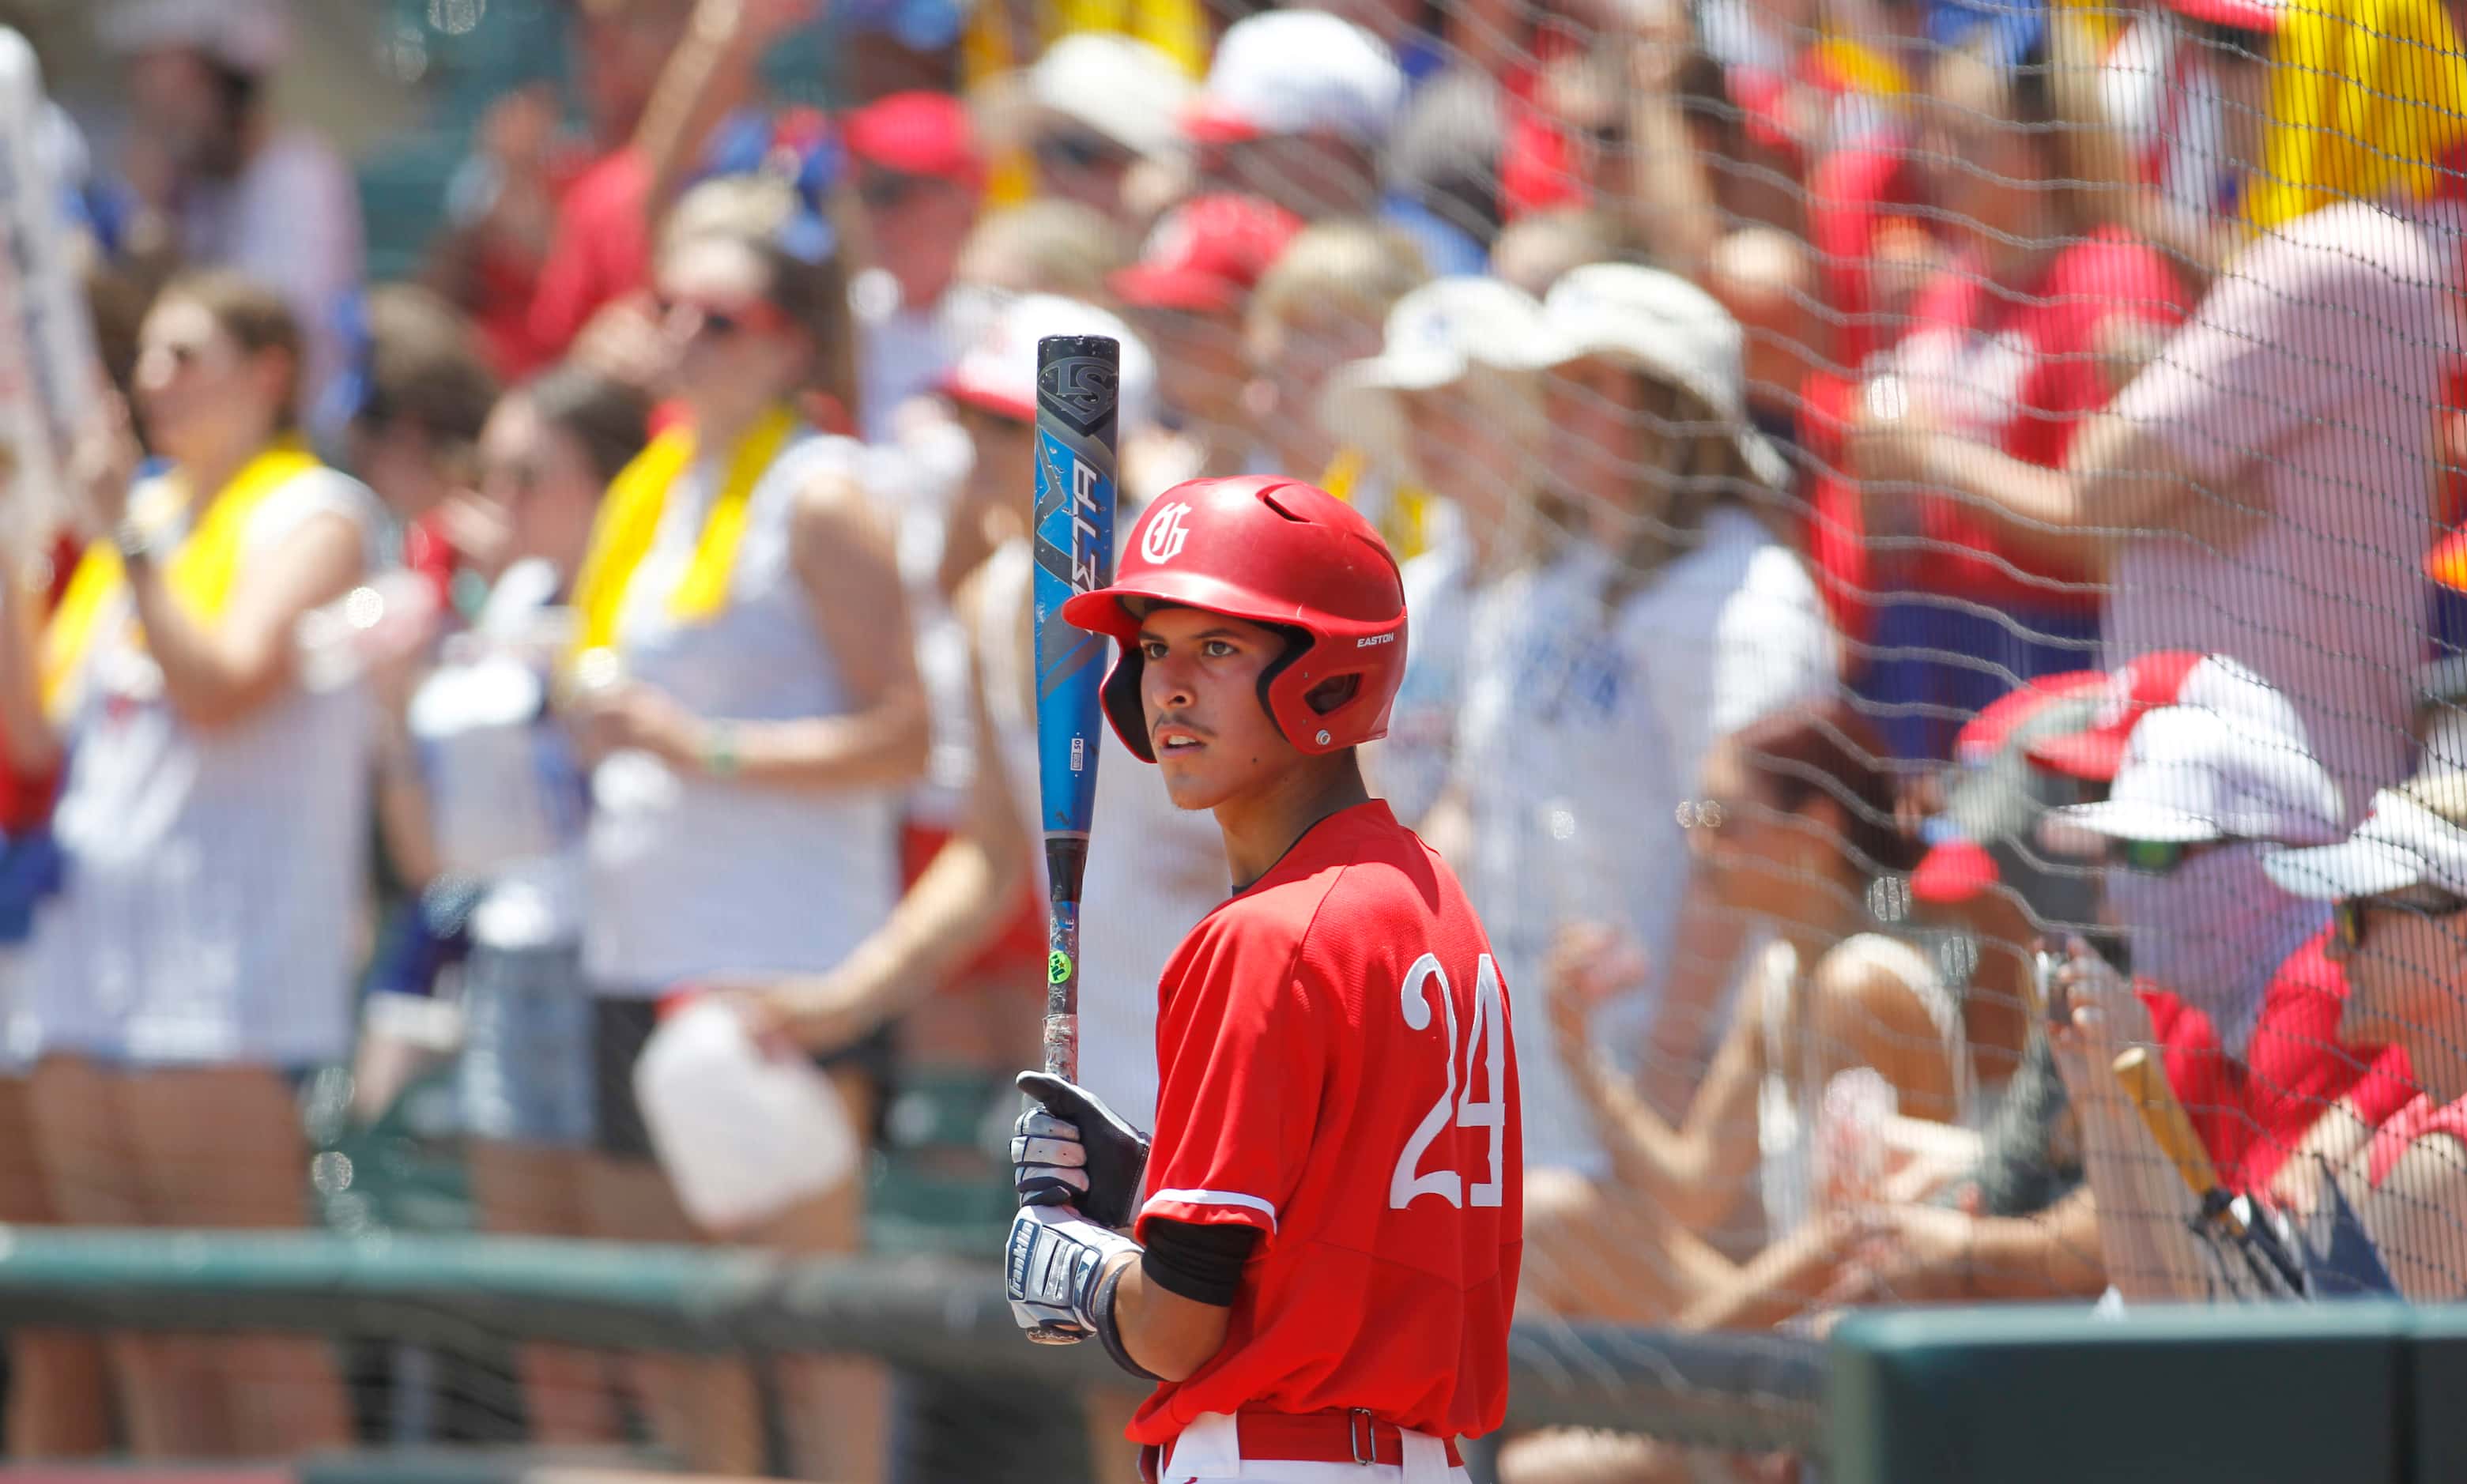 Grapevine catcher Gianni Corral (24) awaits his turn to bat in the bottom of the 1st inning...